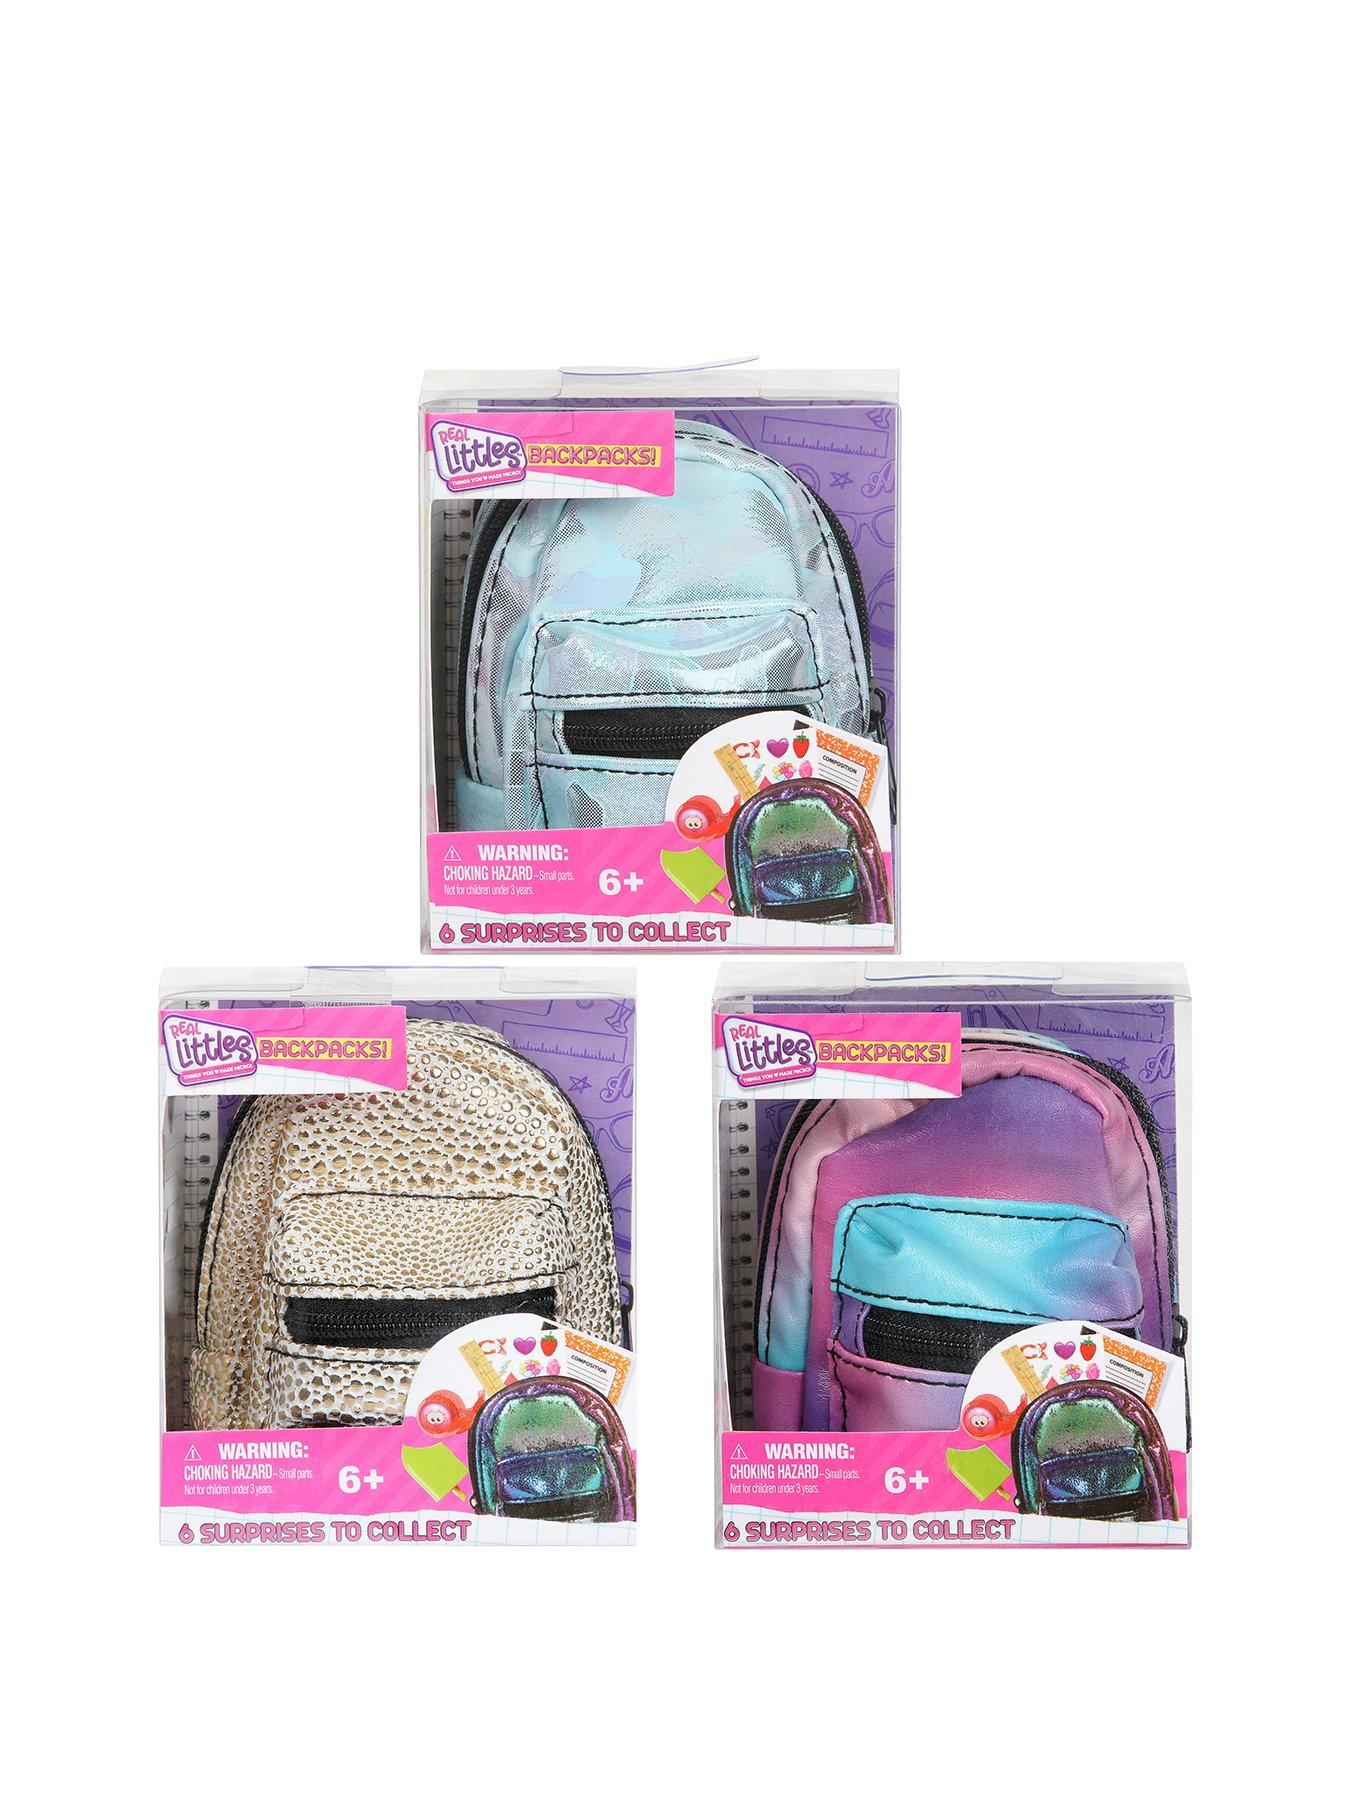  REAL LITTLES - Collectible Micro Handbag Collection with 17  Surprises Inside! : Toys & Games